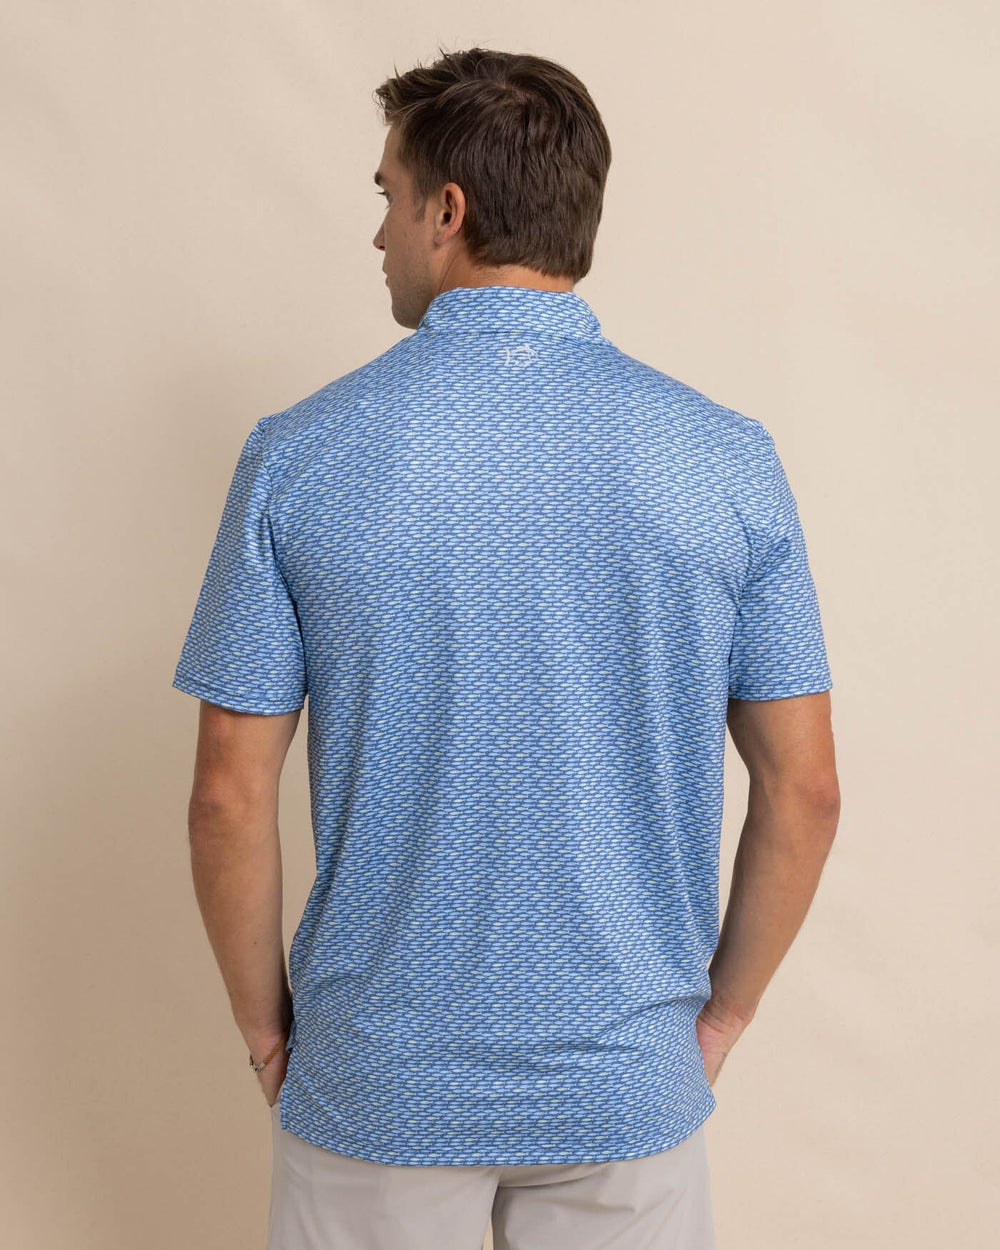 The back view of the Southern Tide Driver Casual Water Printed Polo by Southern Tide - Coronet Blue